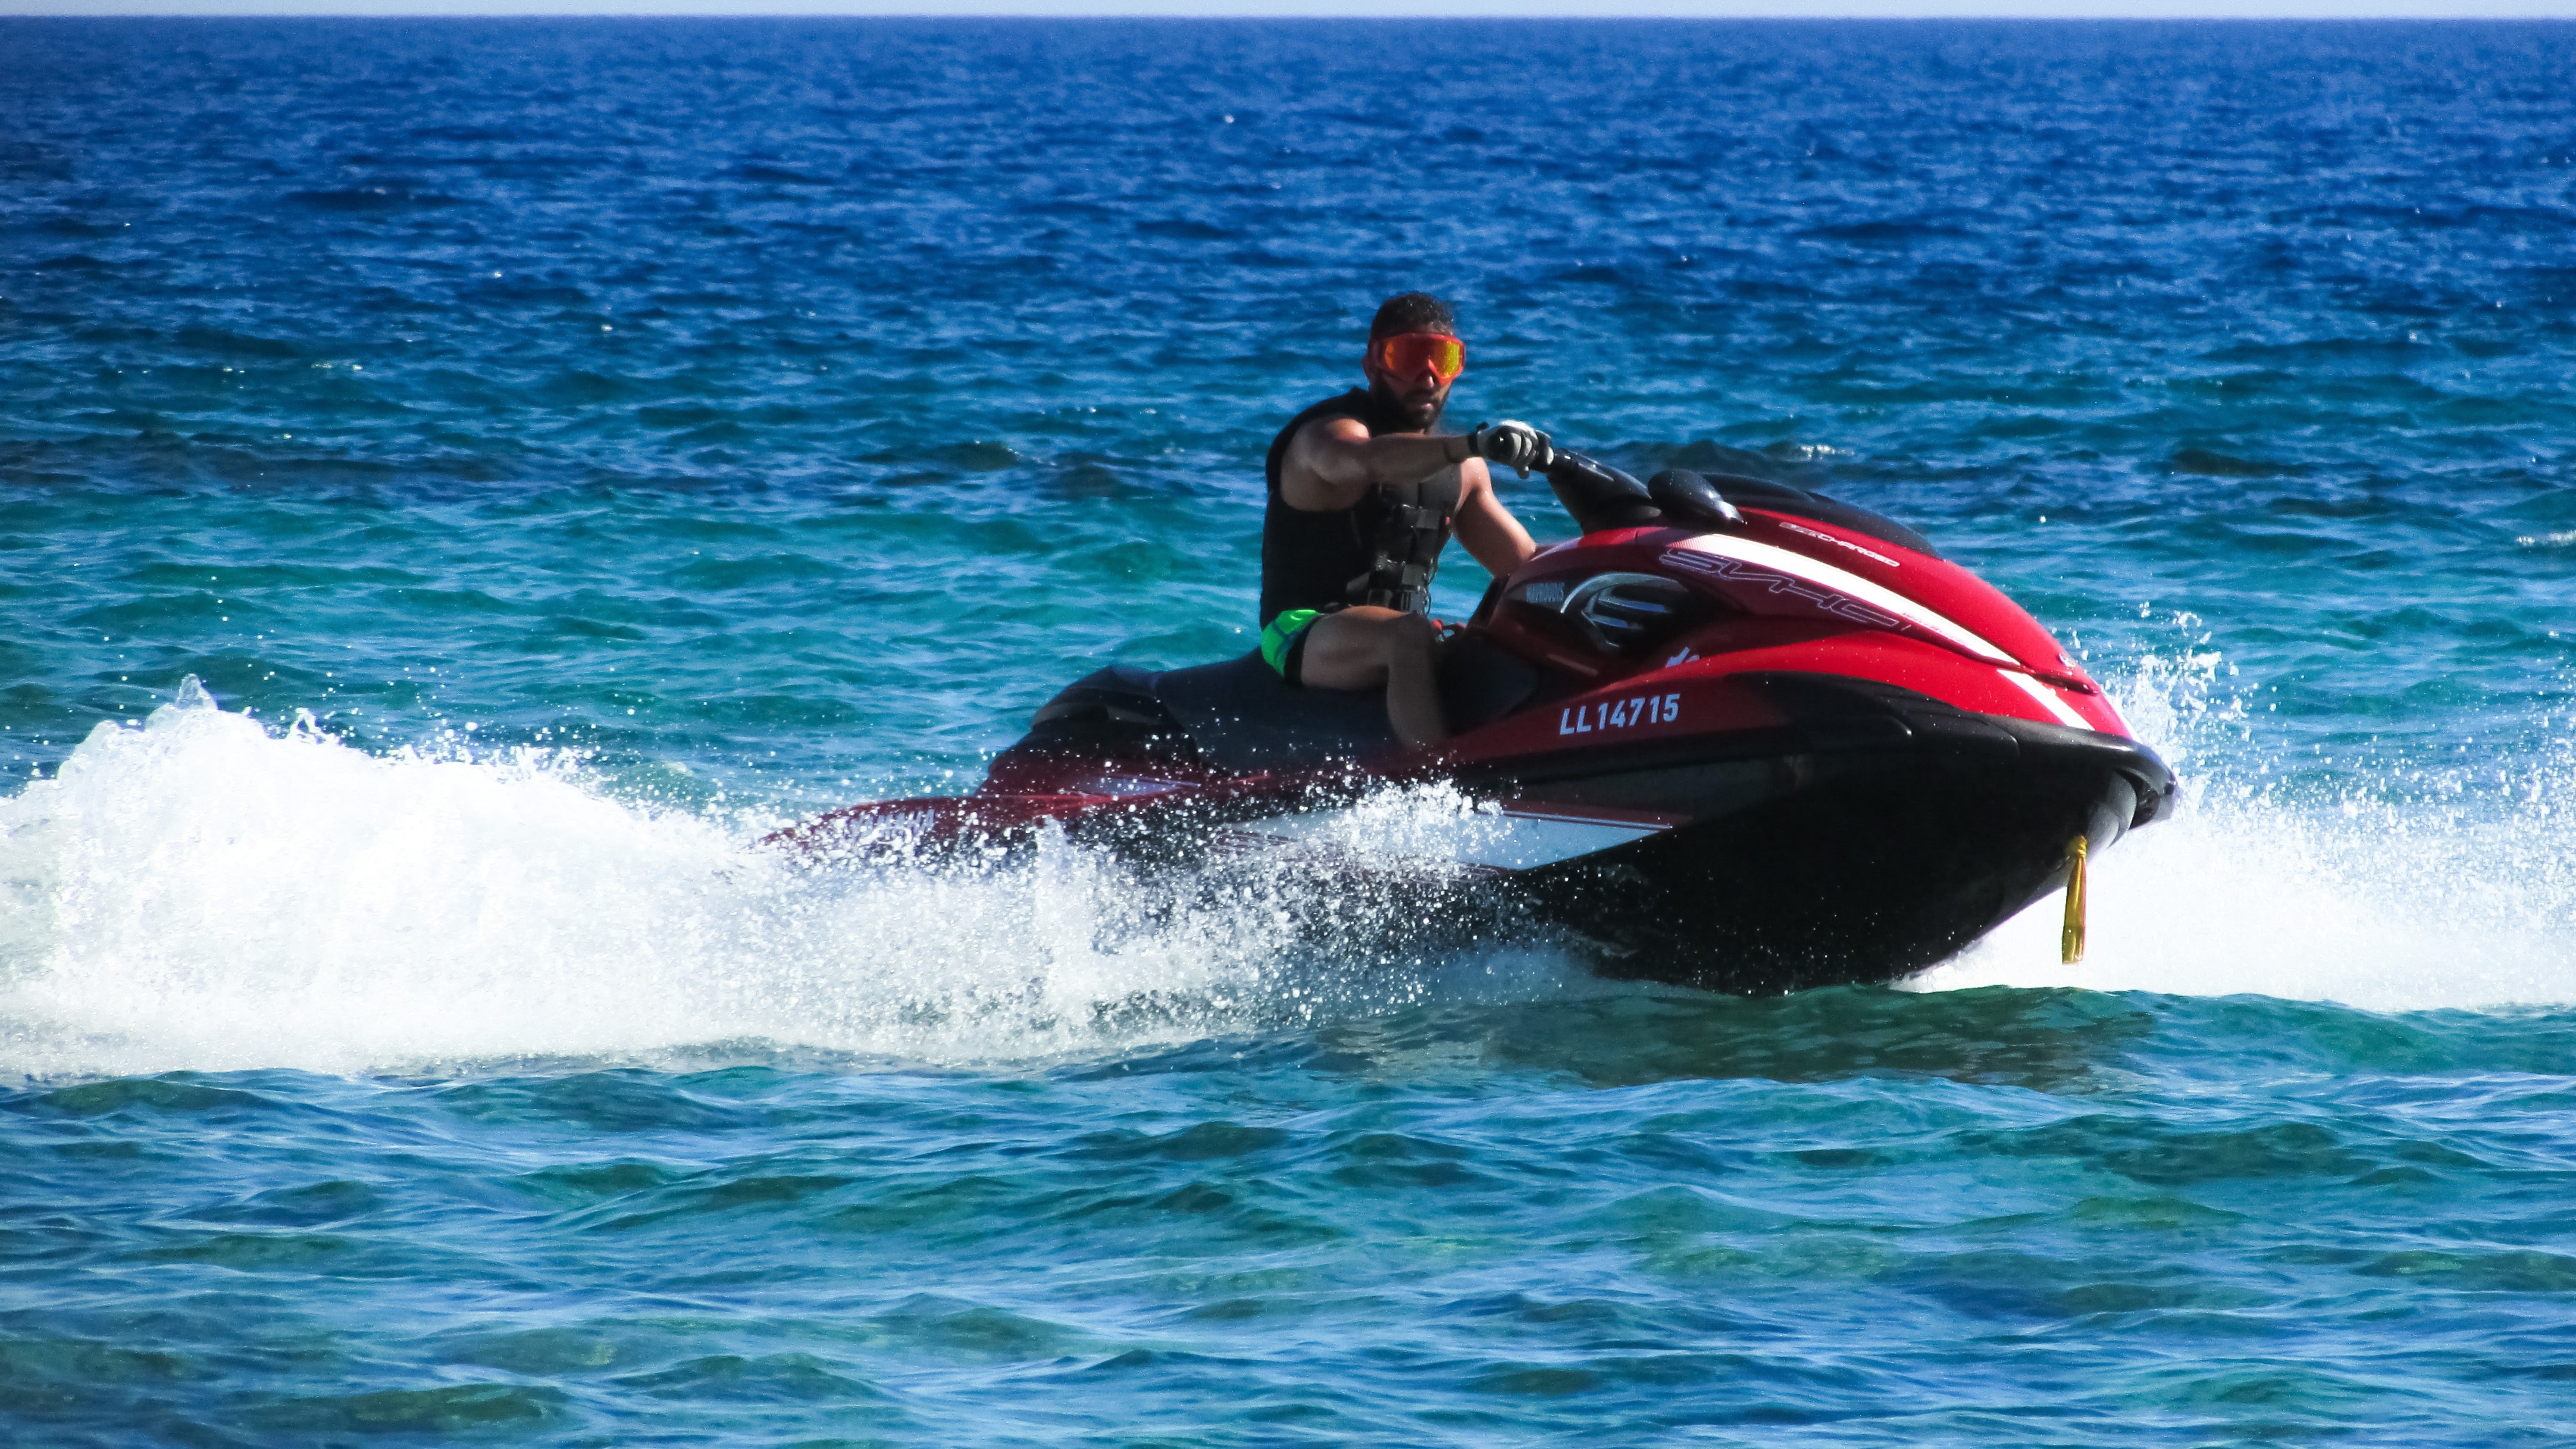 red and black personal water craft